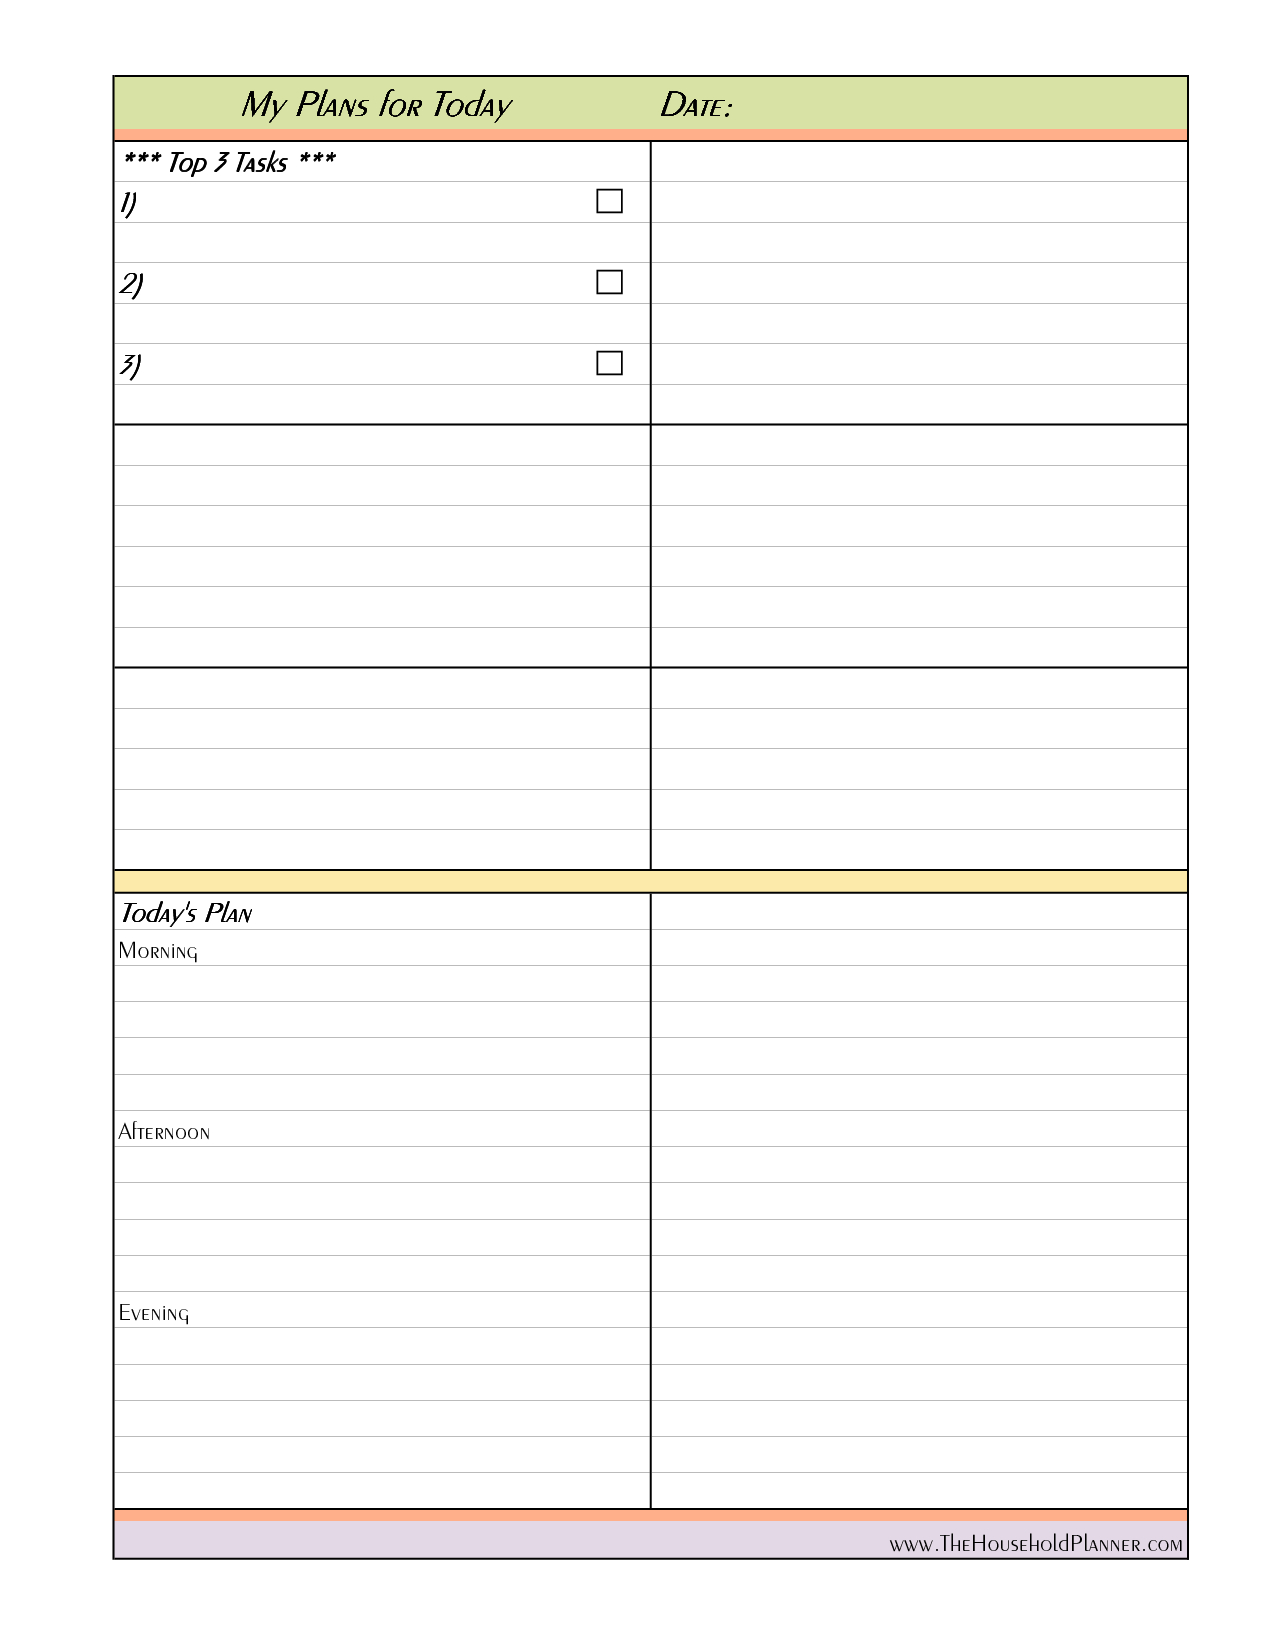 Daily Project Organizer Templates Free | Free Printable Daily - Free Printable Planners And Organizers